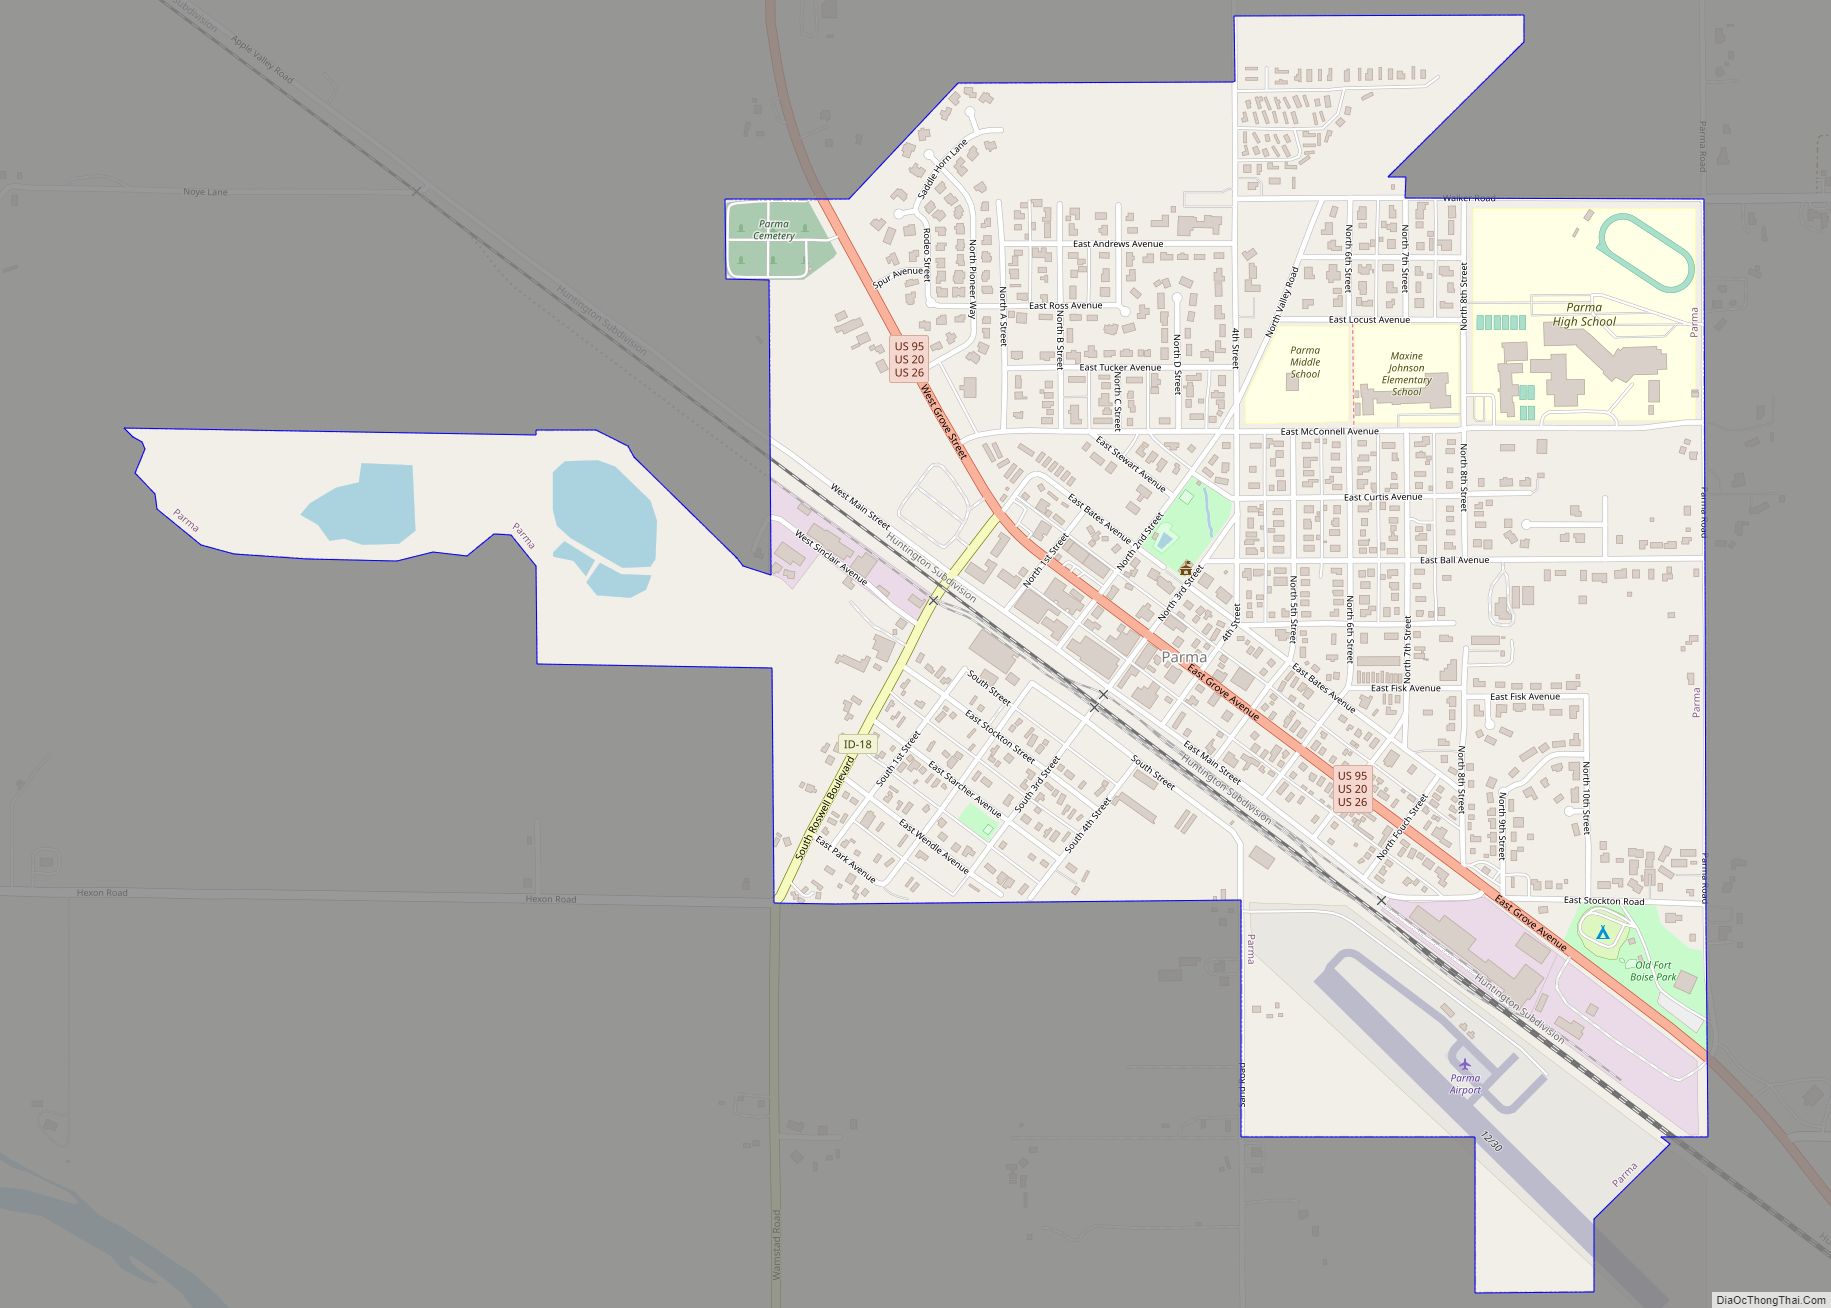 Map of Parma city